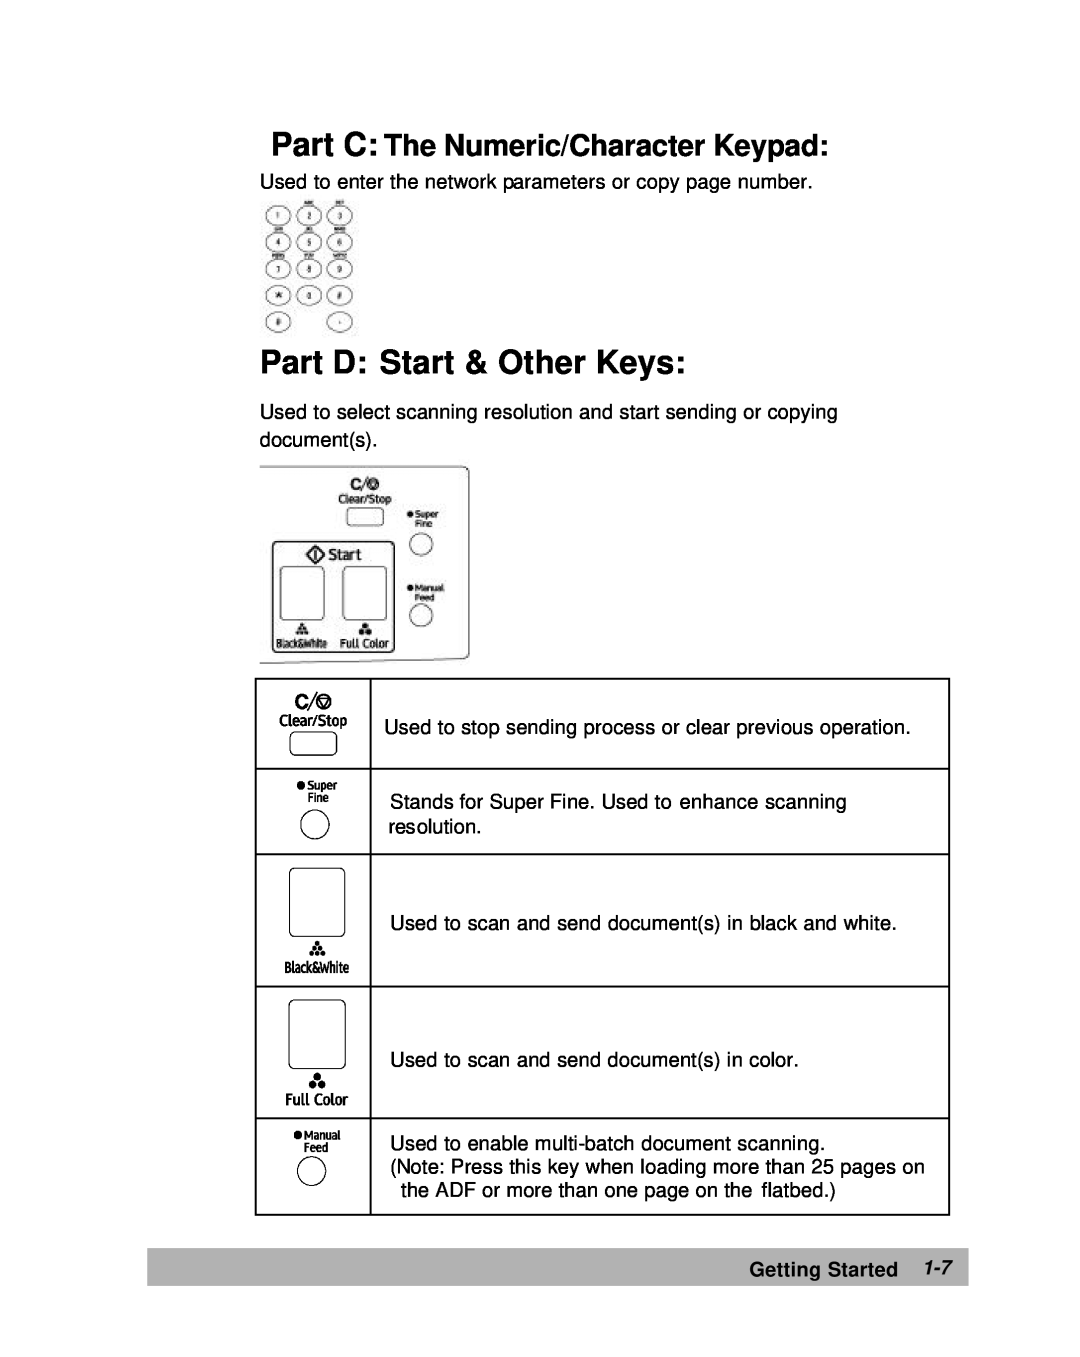 Lanier IS100e manual Part C The Numeric/Character Keypad, Part D Start & Other Keys, Getting Started 